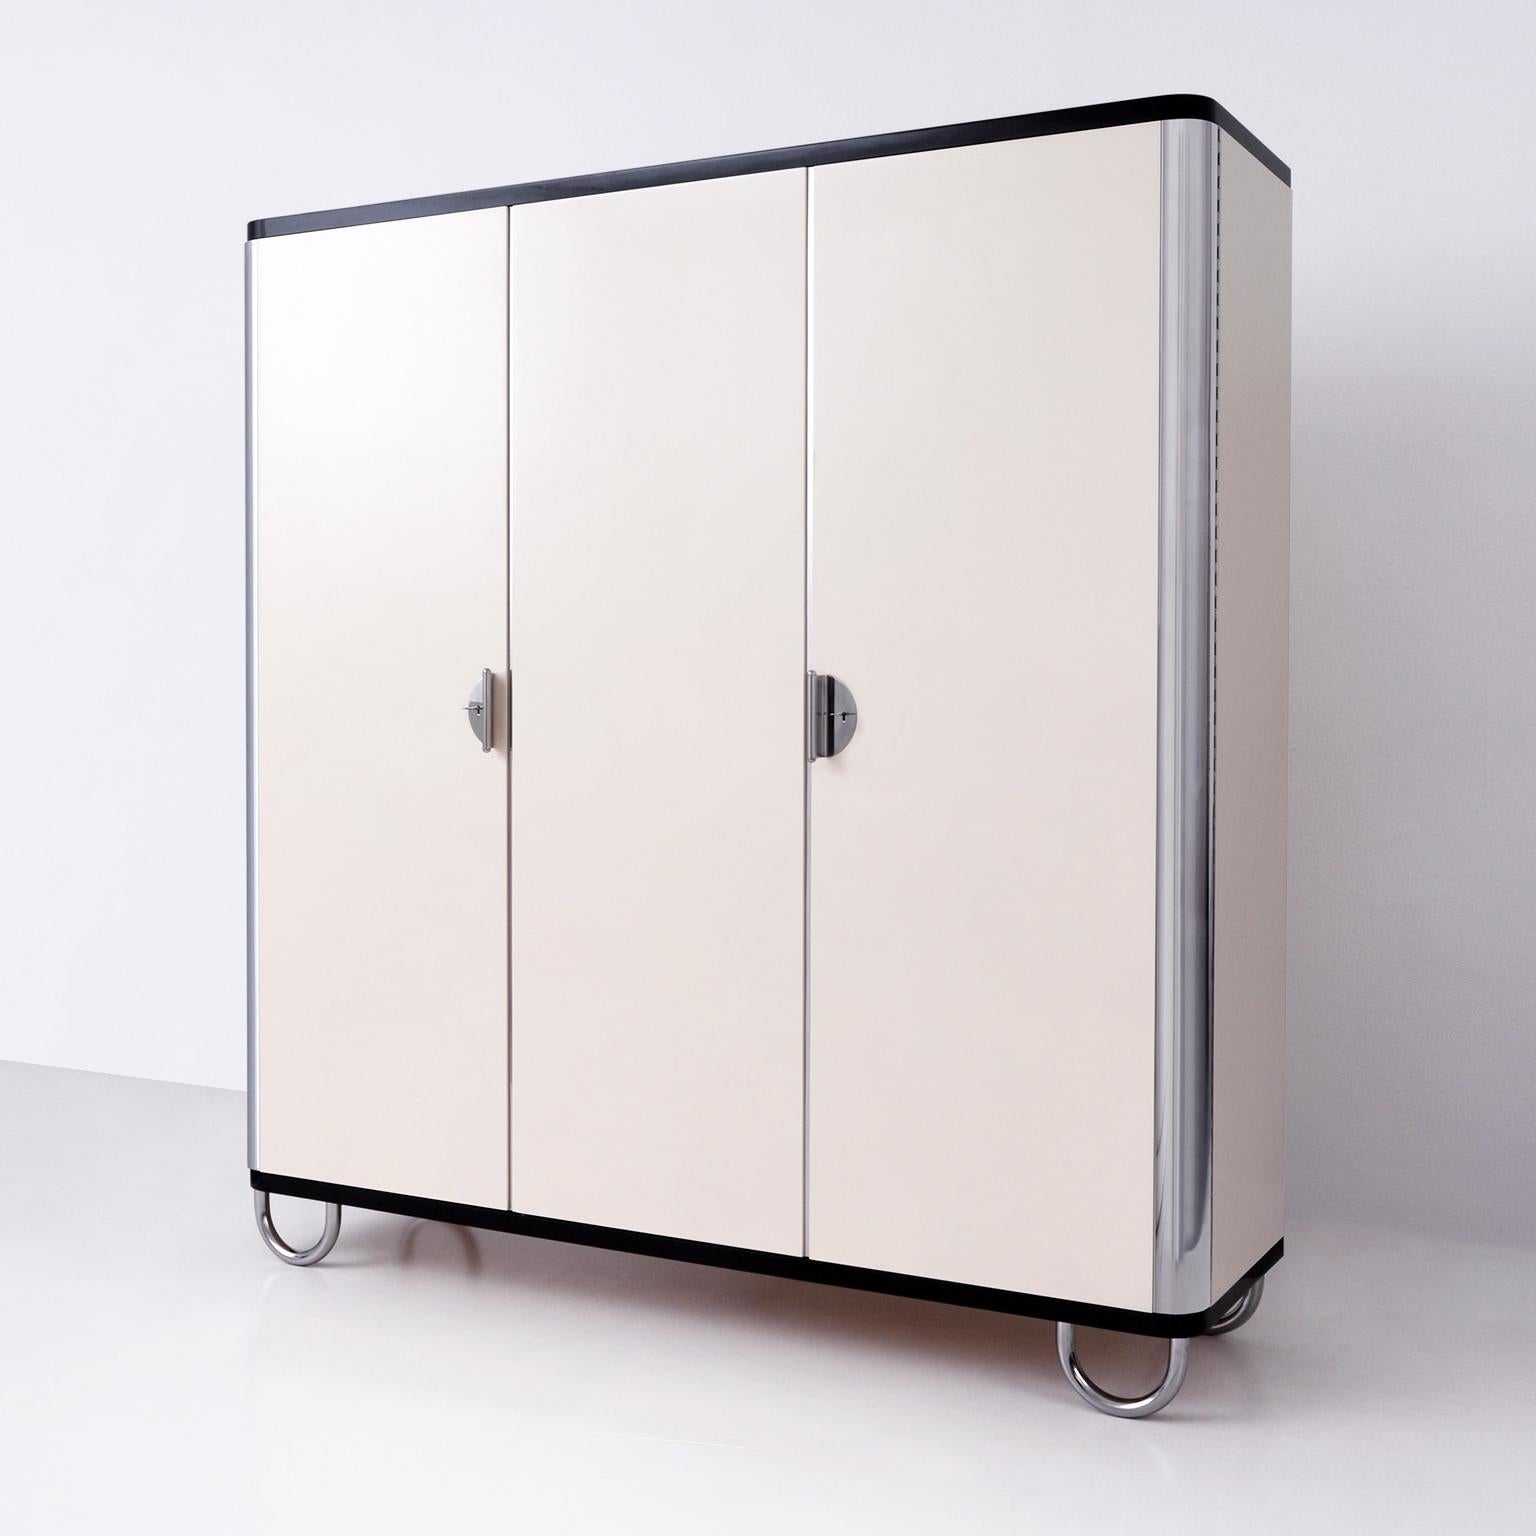 Custom made three-door wardrobe / armoire, designed and manufactured by GMD Berlin, exclusively presented in our Rudolf Vichr Collection.

These high-quality, handmade furniture in a classic, timeless design is made from selected materials